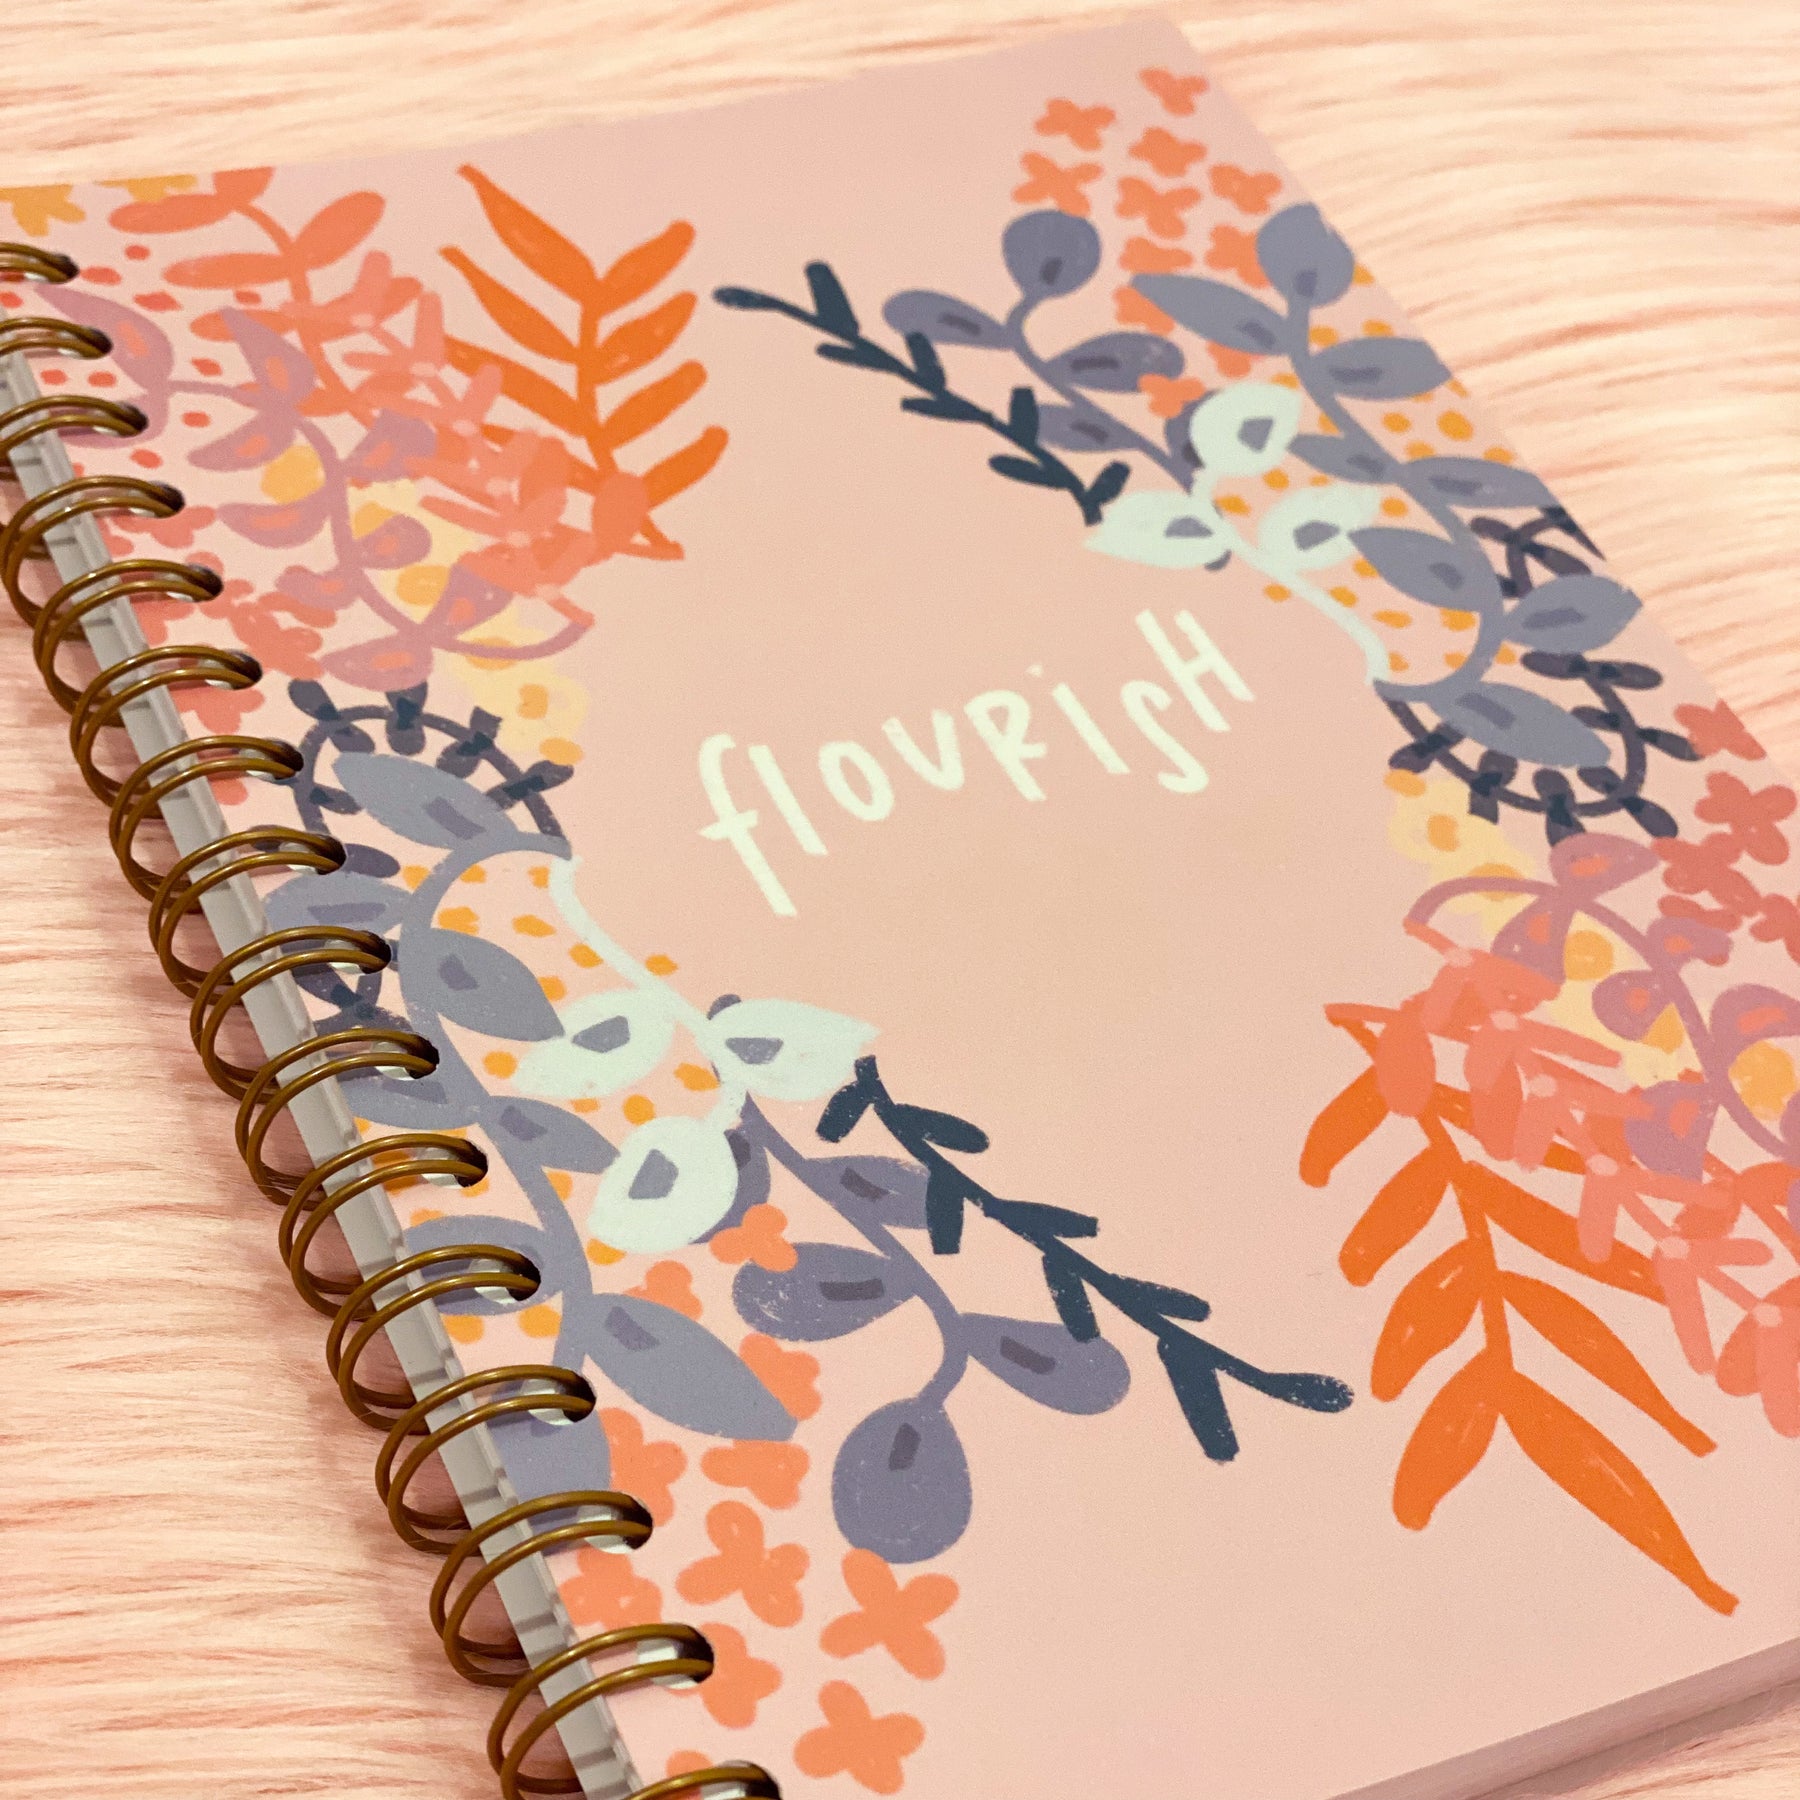 Swaygirls notebooks, Progress over perfection notebook, Self care journal  by swaygirls, Softcover notebooks, Inspirational lined notebooks